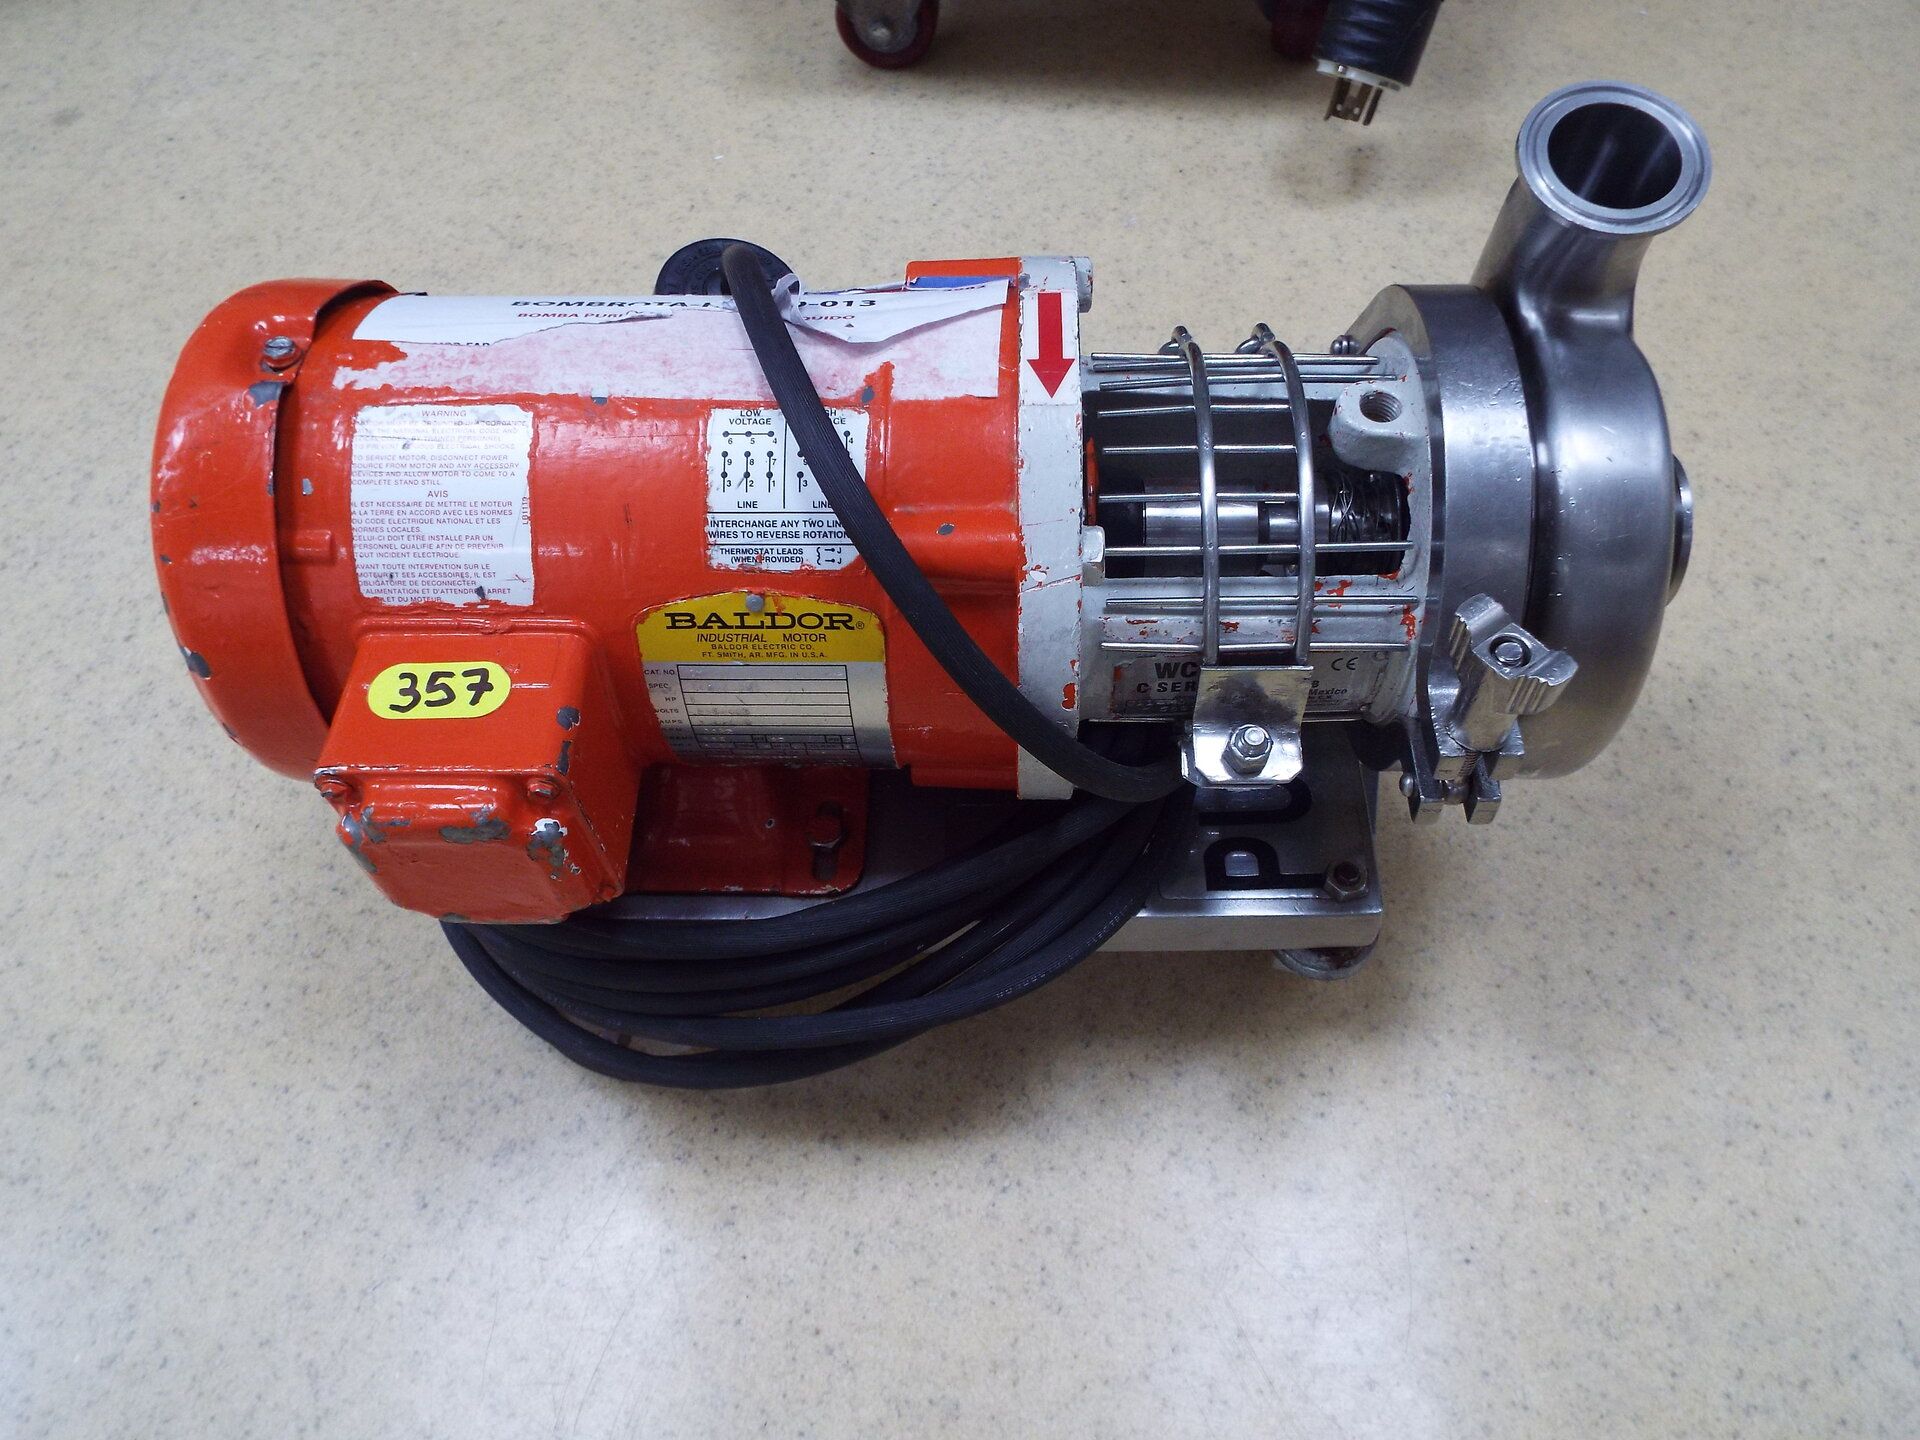 1 HP stainless steel centrifgual pump with 6" diameter impeller stainless steel base on casters